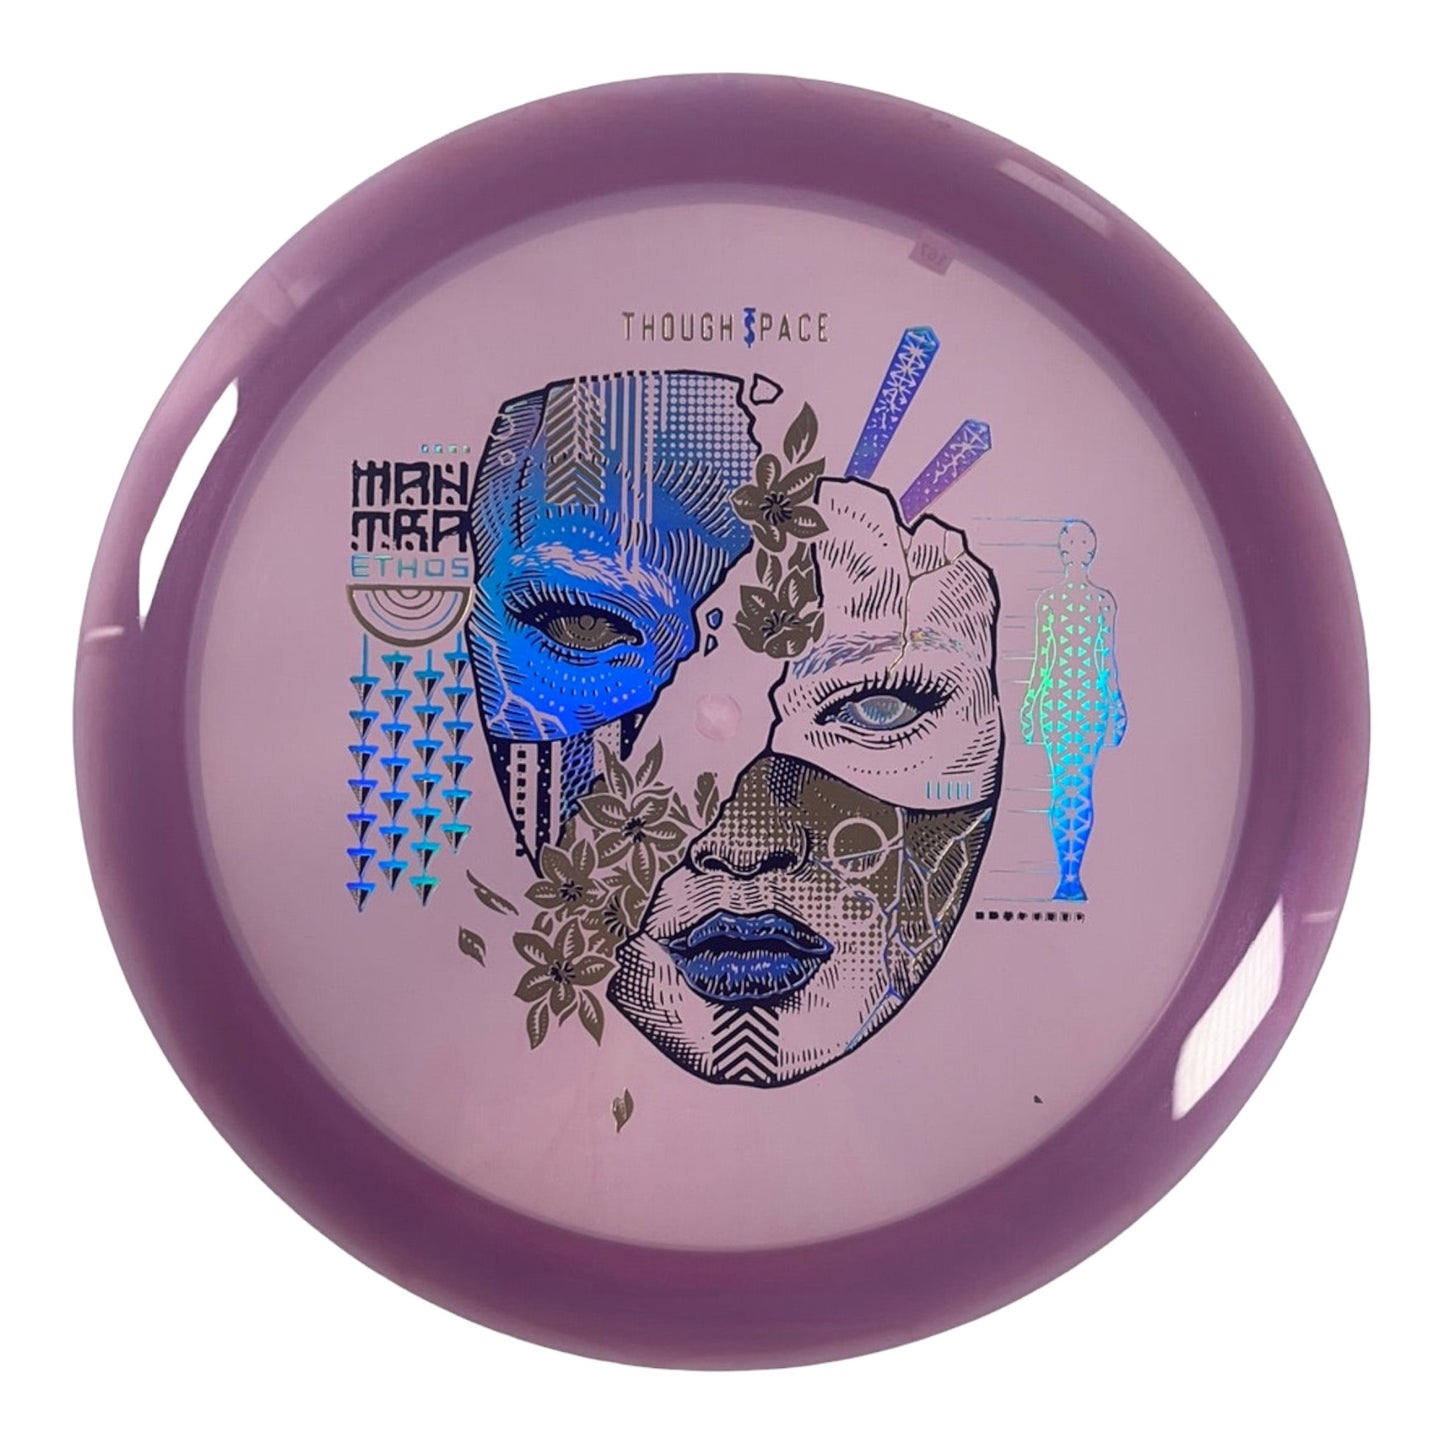 Thought Space Athletics Mantra | Ethos | Purple/Blue Holo 167g Disc Golf